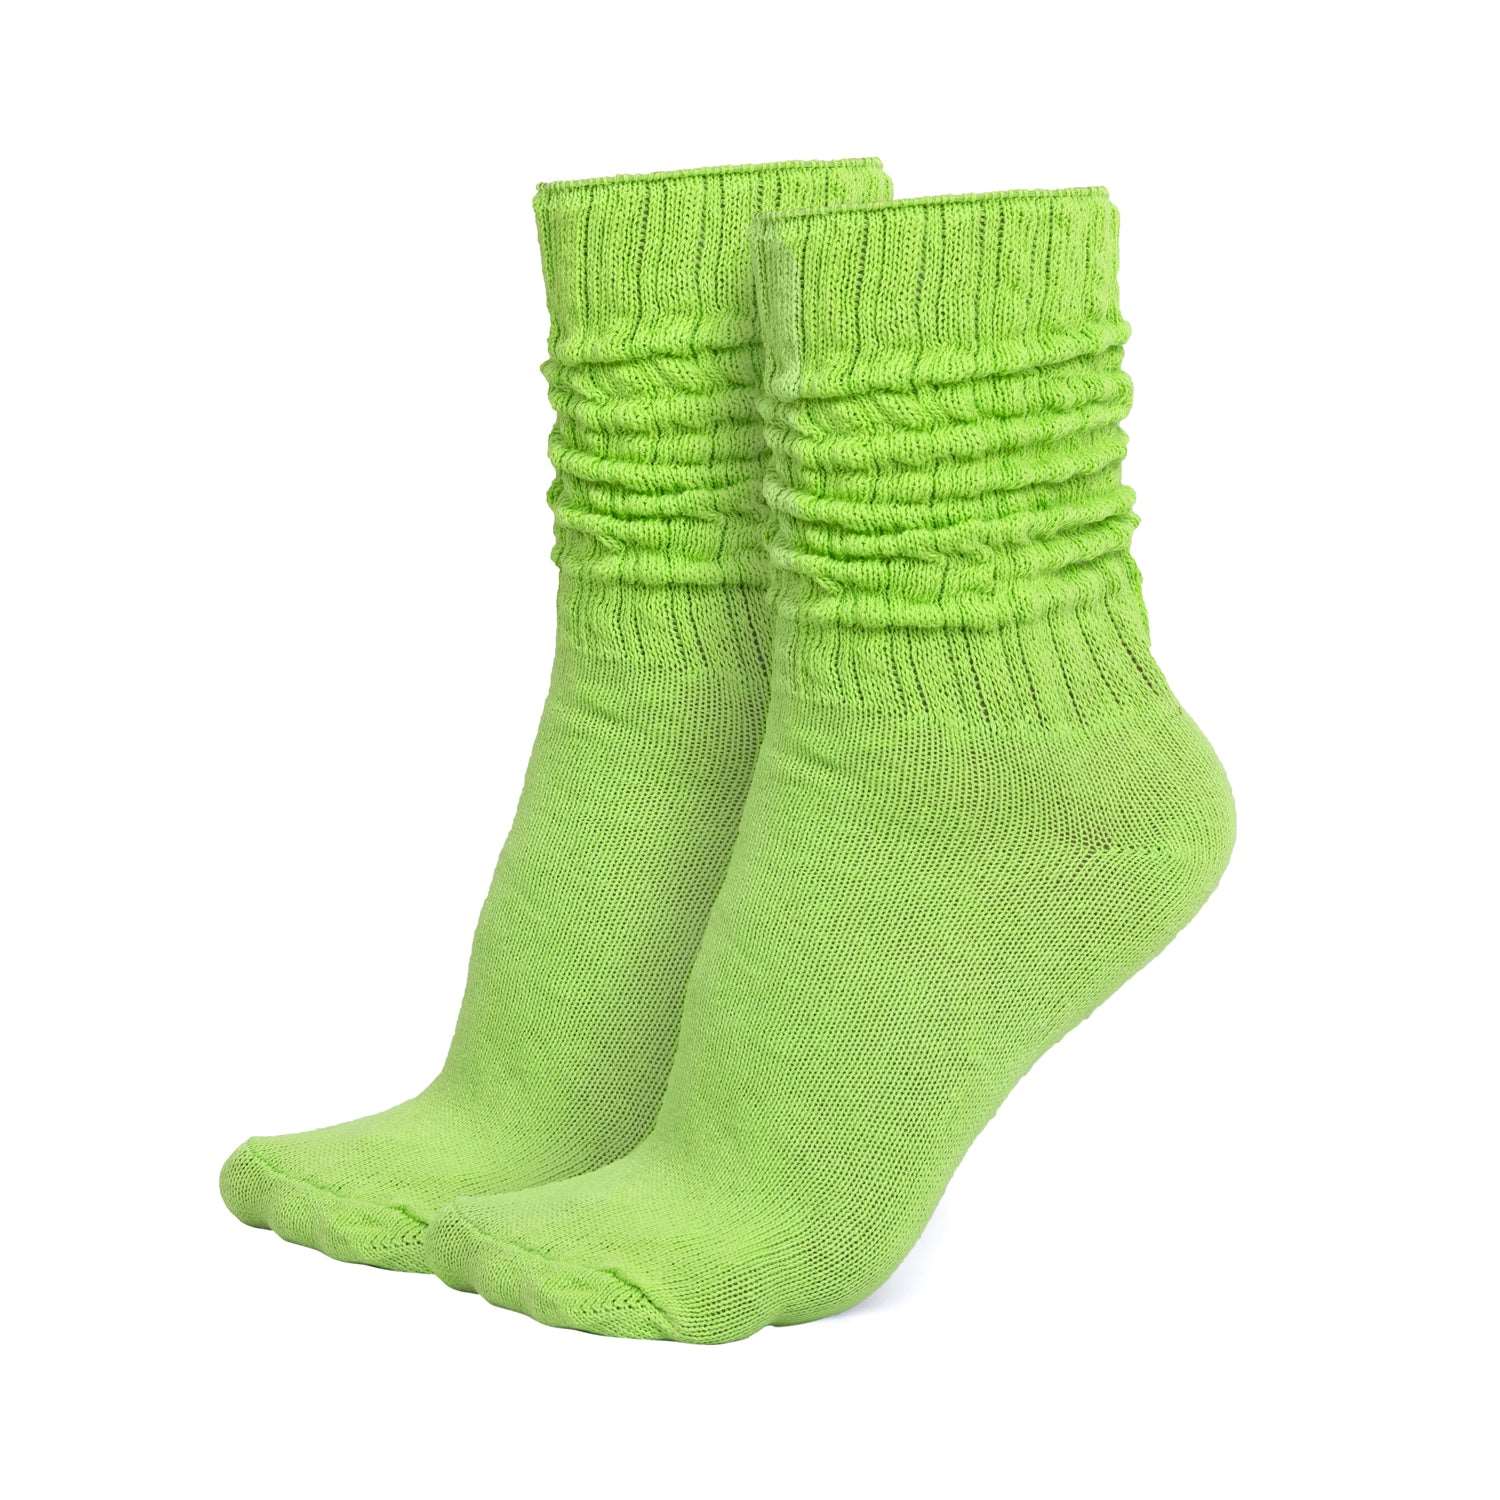 MDR Lightweight Cotton Slouch Socks For Women and Men 1 Pair Made